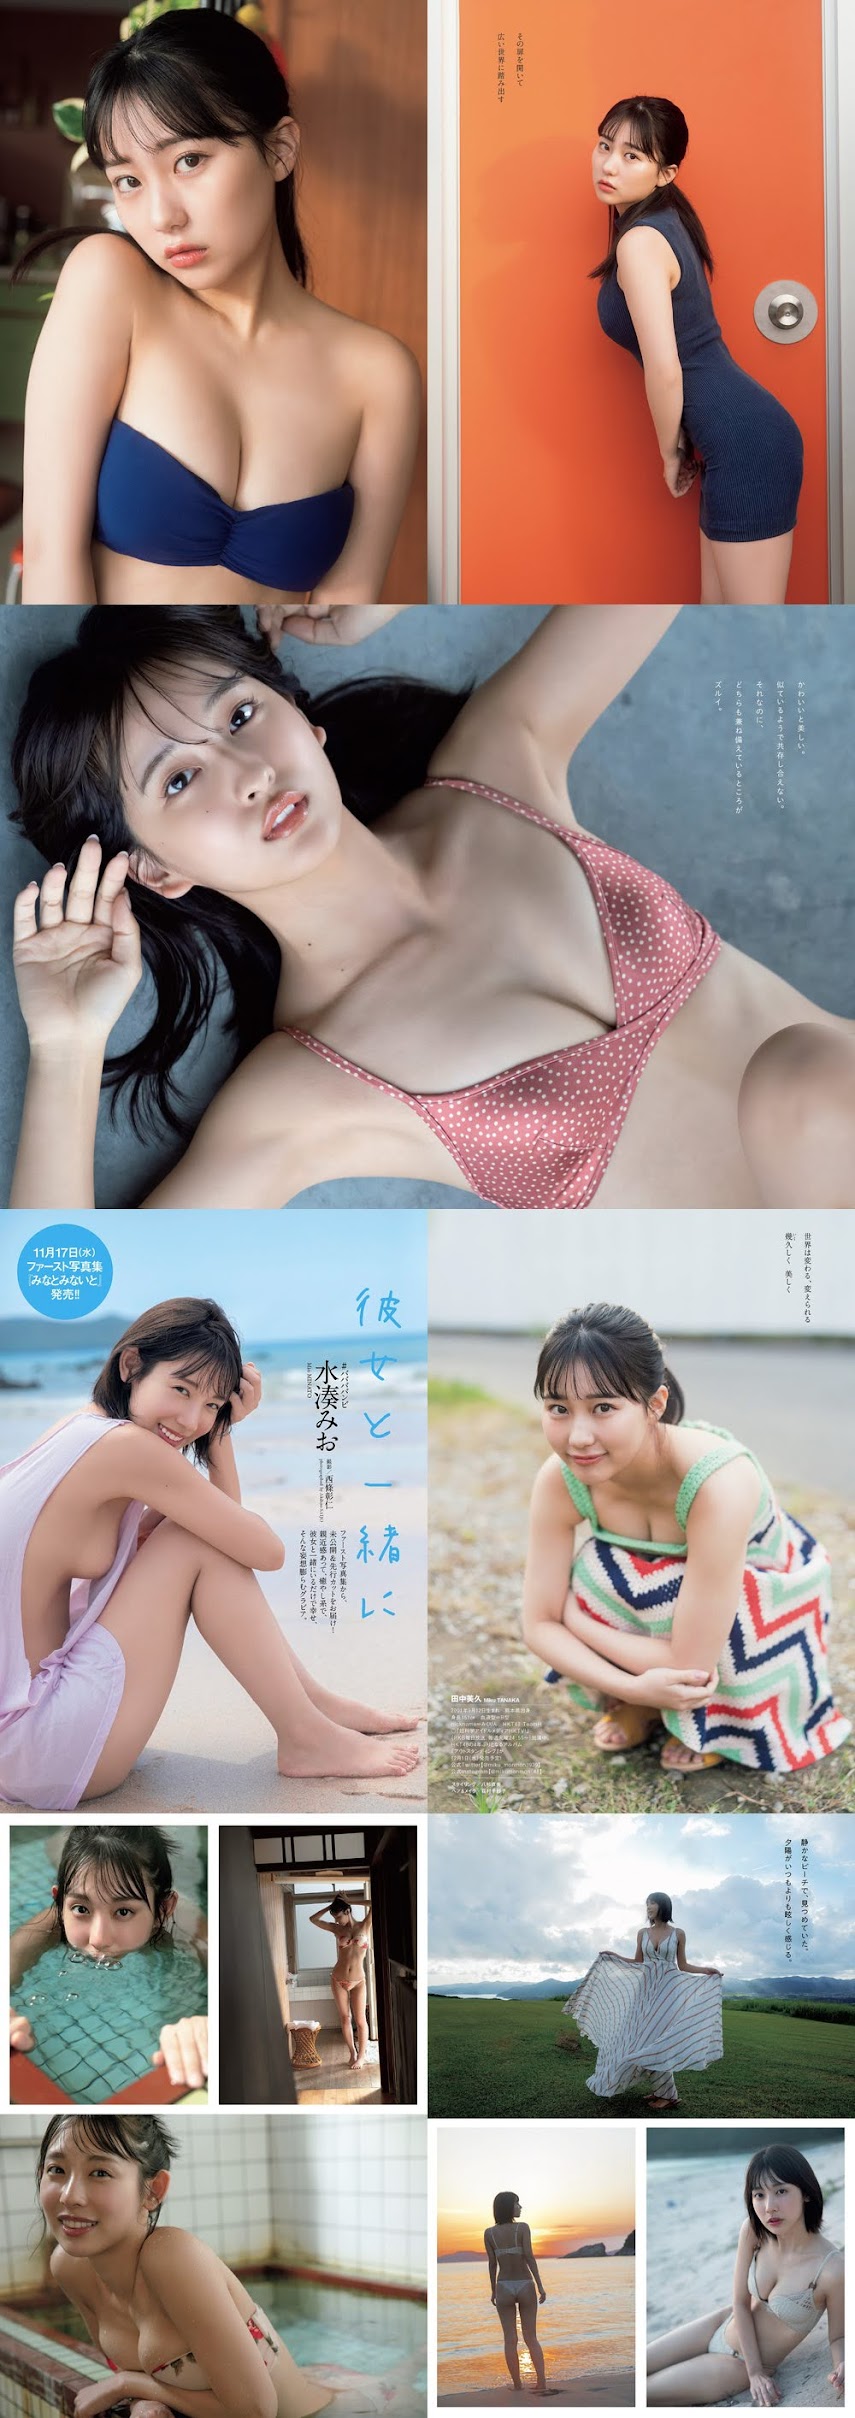 [Weekly Playboy] 2021 No.48 田中美久 水湊みお 藤乃あおい ゆうちゃみ 関根優那 斎藤里奈 染谷有香 他   P214443 weekly-playboy 12190 